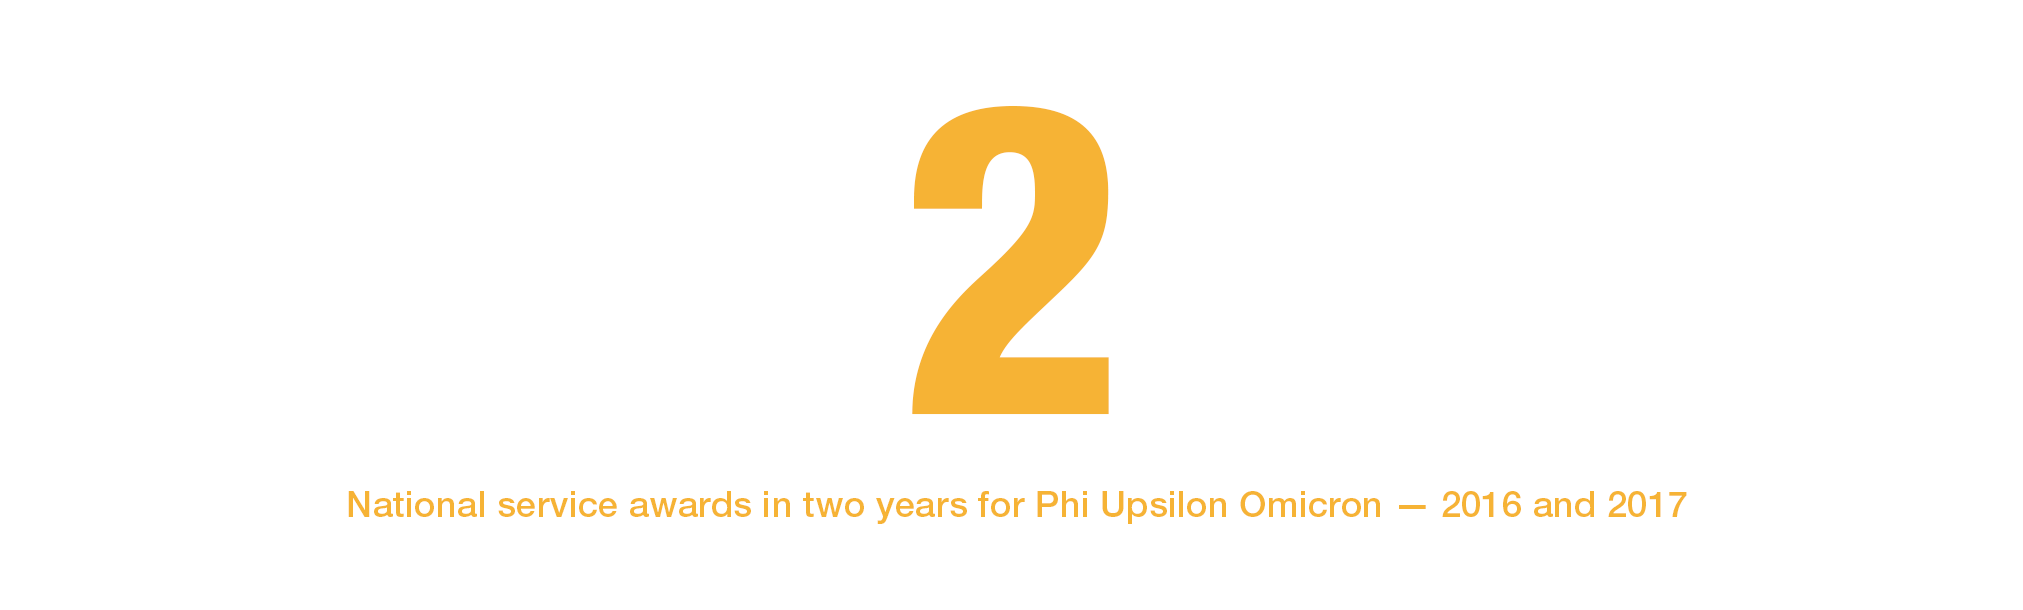 Two national service awards in two years for Phi Upsilon Omicron